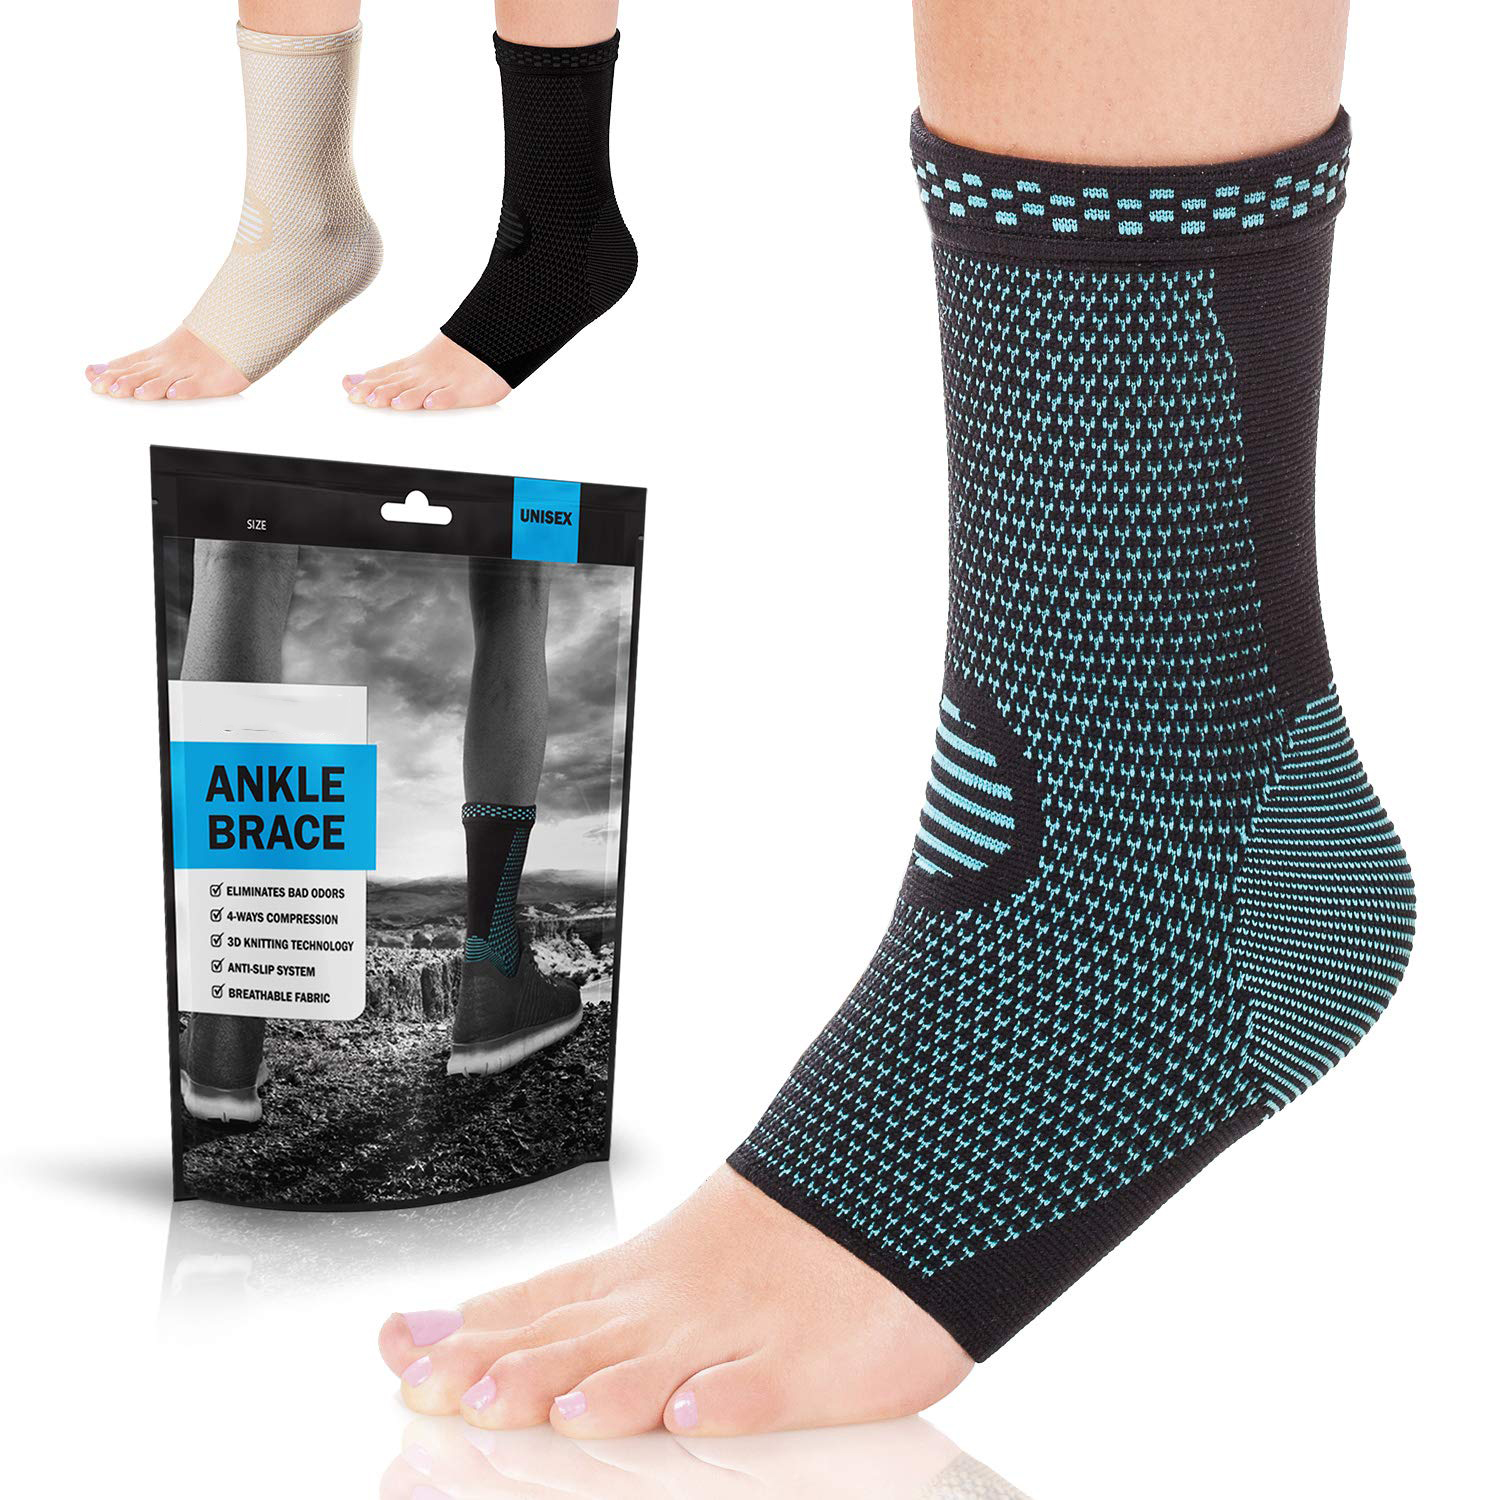 Leading Manufacturer for Elbow Bursitis Brace - Ankle Brace Compression Support Sleeve (Pair) for Injury Recovery, Joint Pain and More. Achilles Tendon Support, Plantar Fasciitis Foot Socks with A...